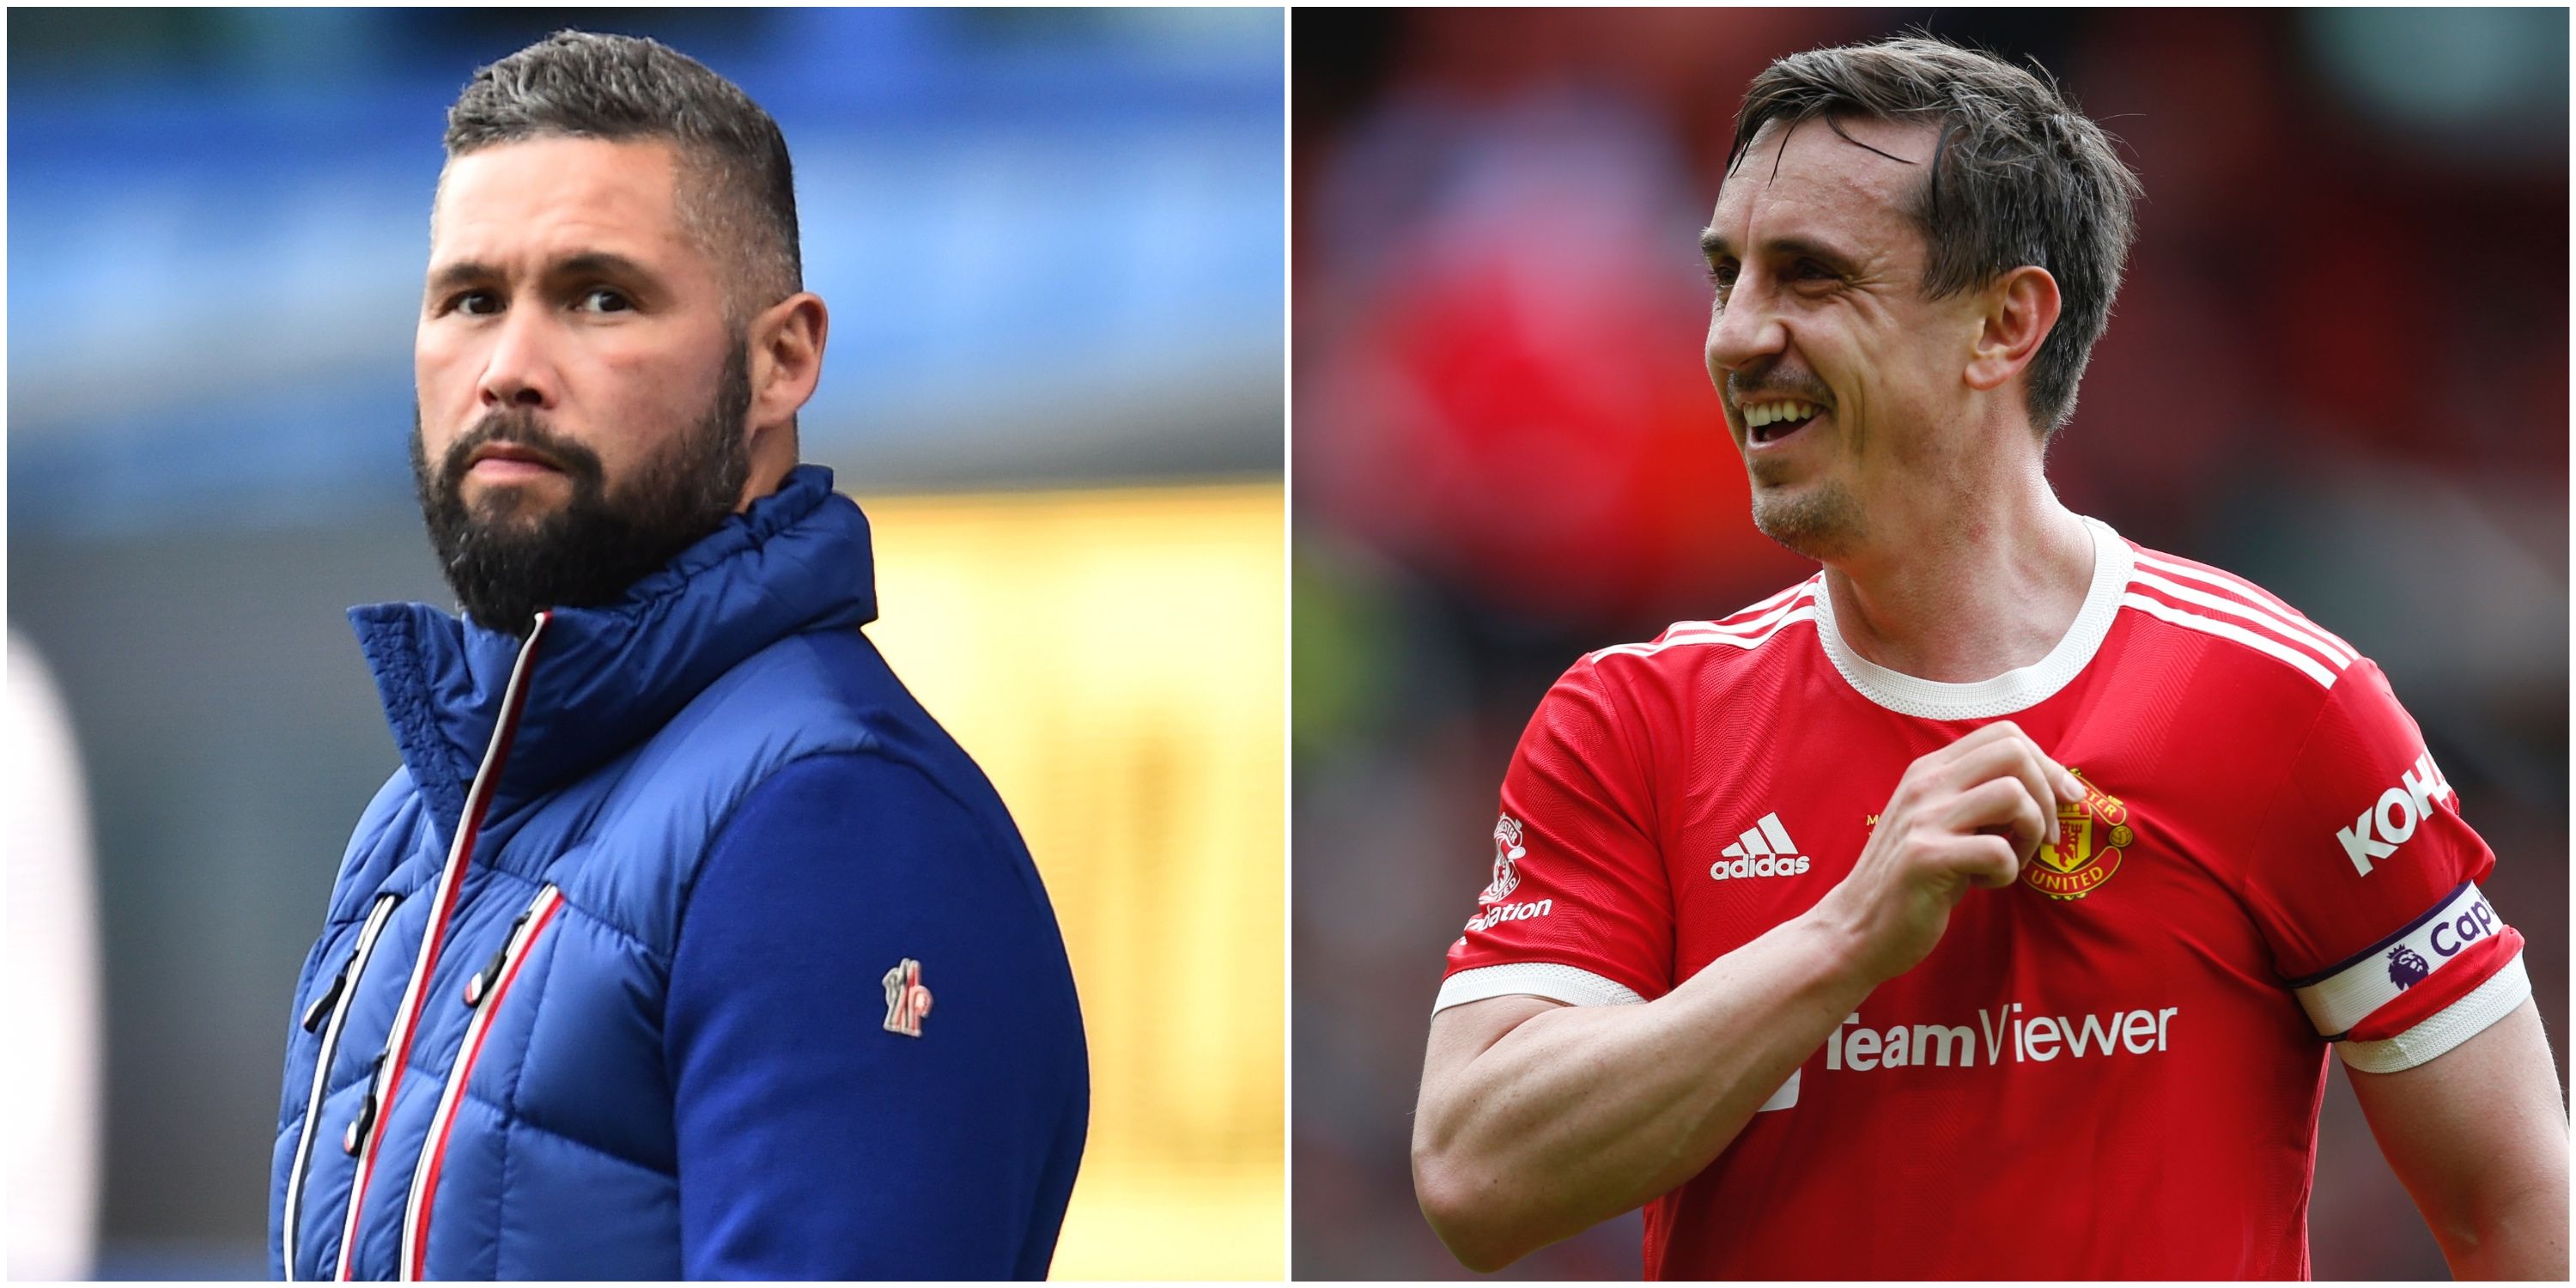 Tony Bellew disgusted as mural of Man Utd hero Gary Neville is unveiled in Liverpool